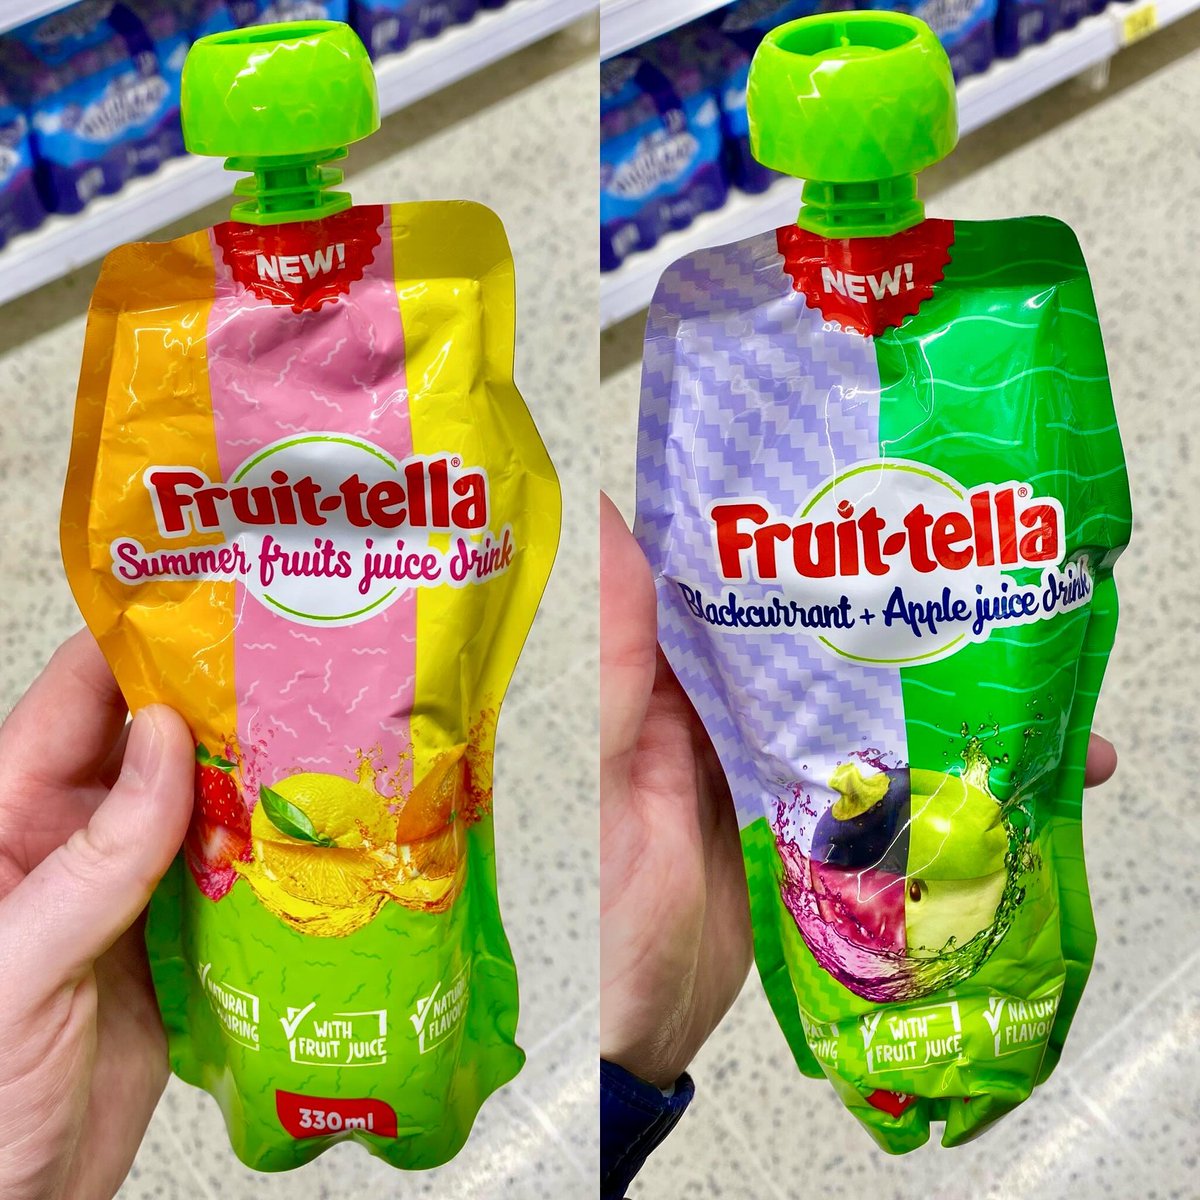 We can't wait to try these new Fruitella drinks, which have just popped up in store💖! Thanks to instagram.com/newfoodsuk for spotting these! Which flavour would you pick first🤤?!